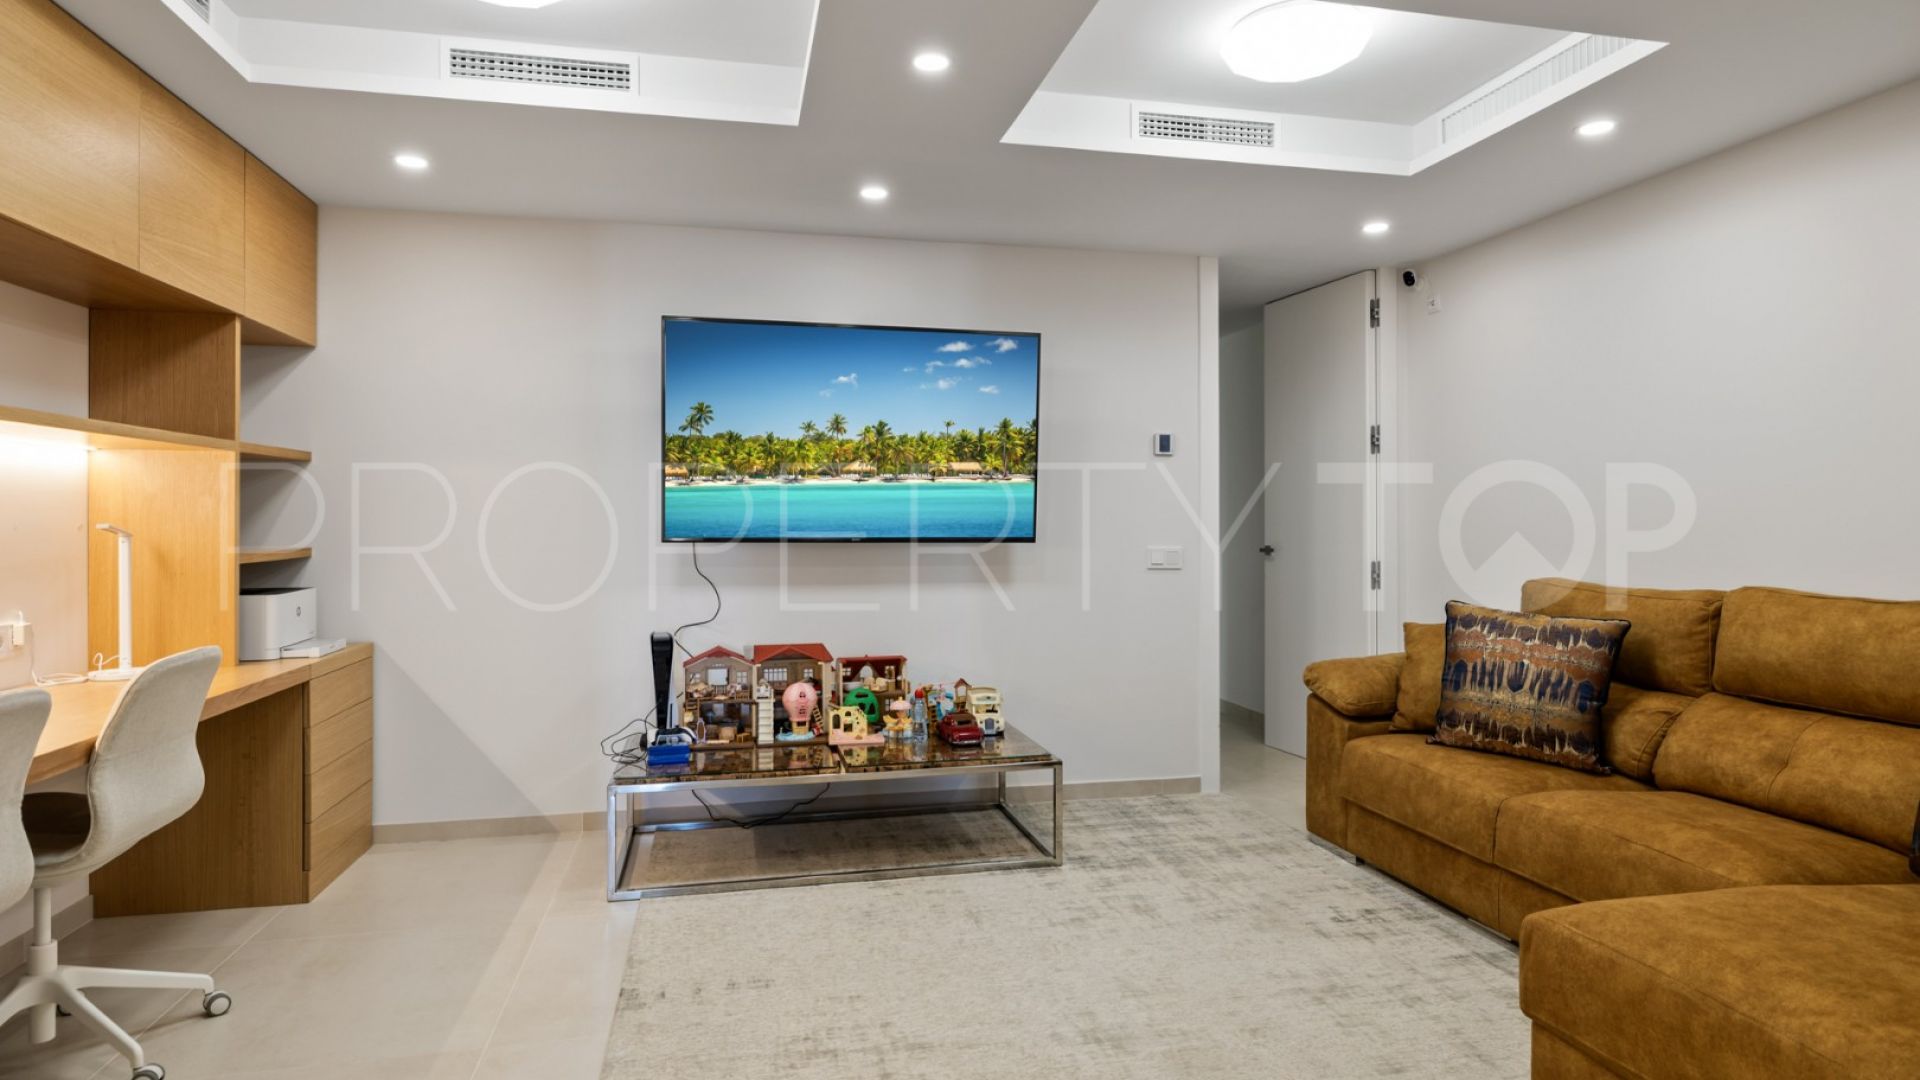 Buy 9 Lions Residences apartment